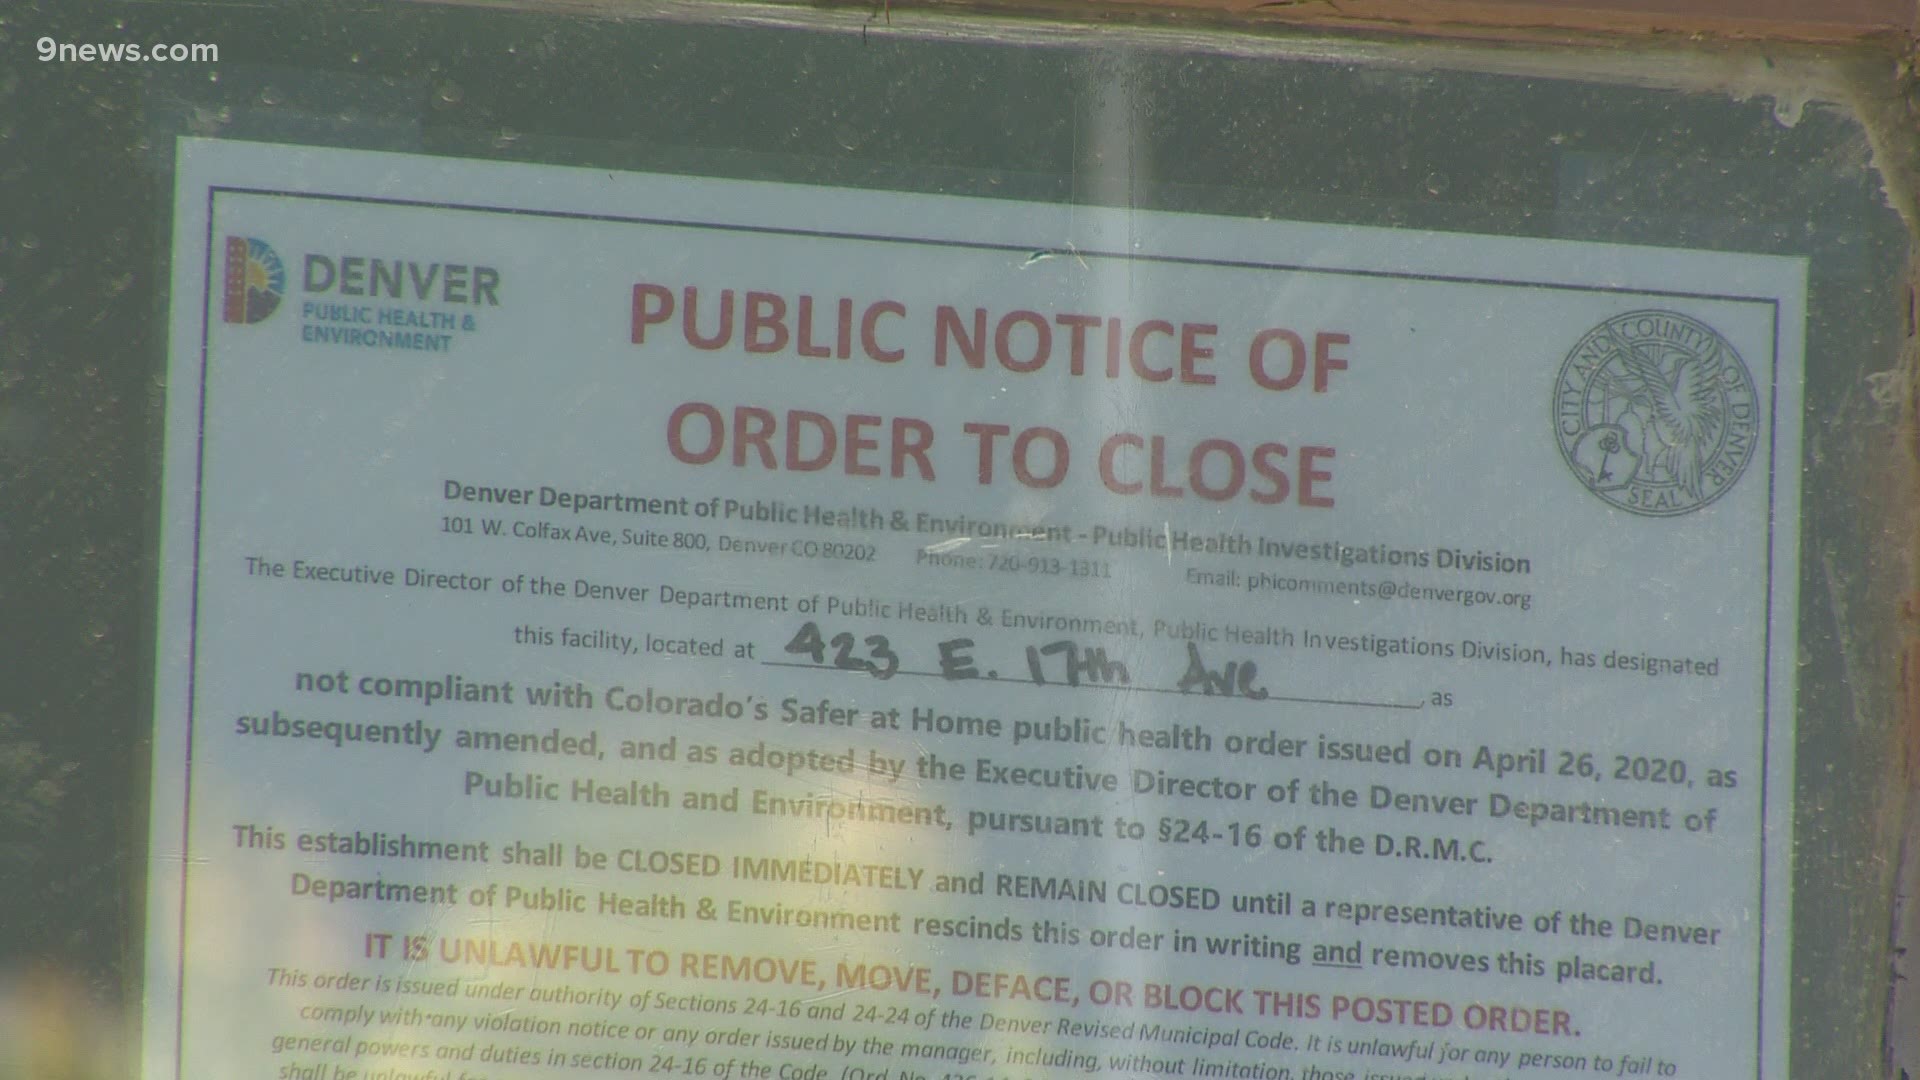 A "Home by 10" public health order went into effect Sunday in Denver in an effort to slow the spread of COVID-19.